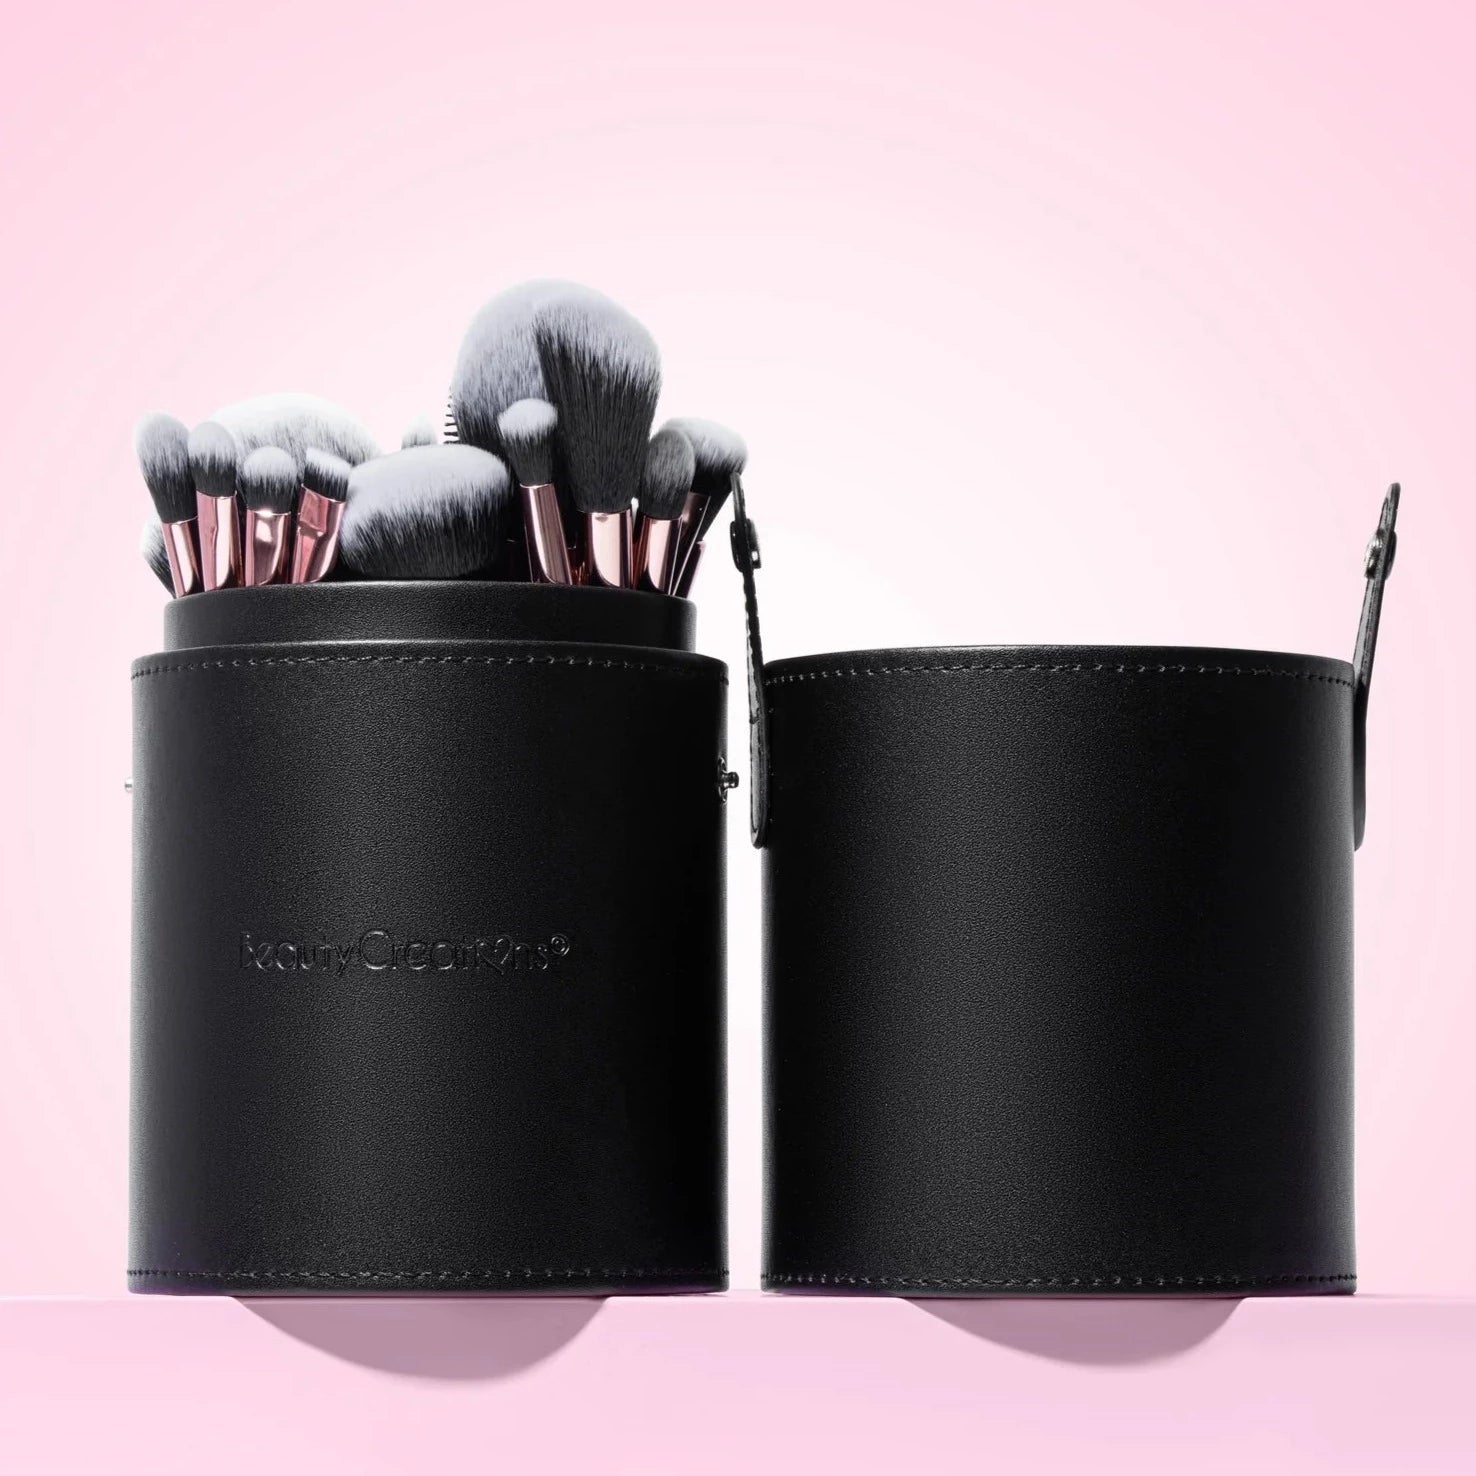 Beauty Creations - Unbothered 24pc Brush Set